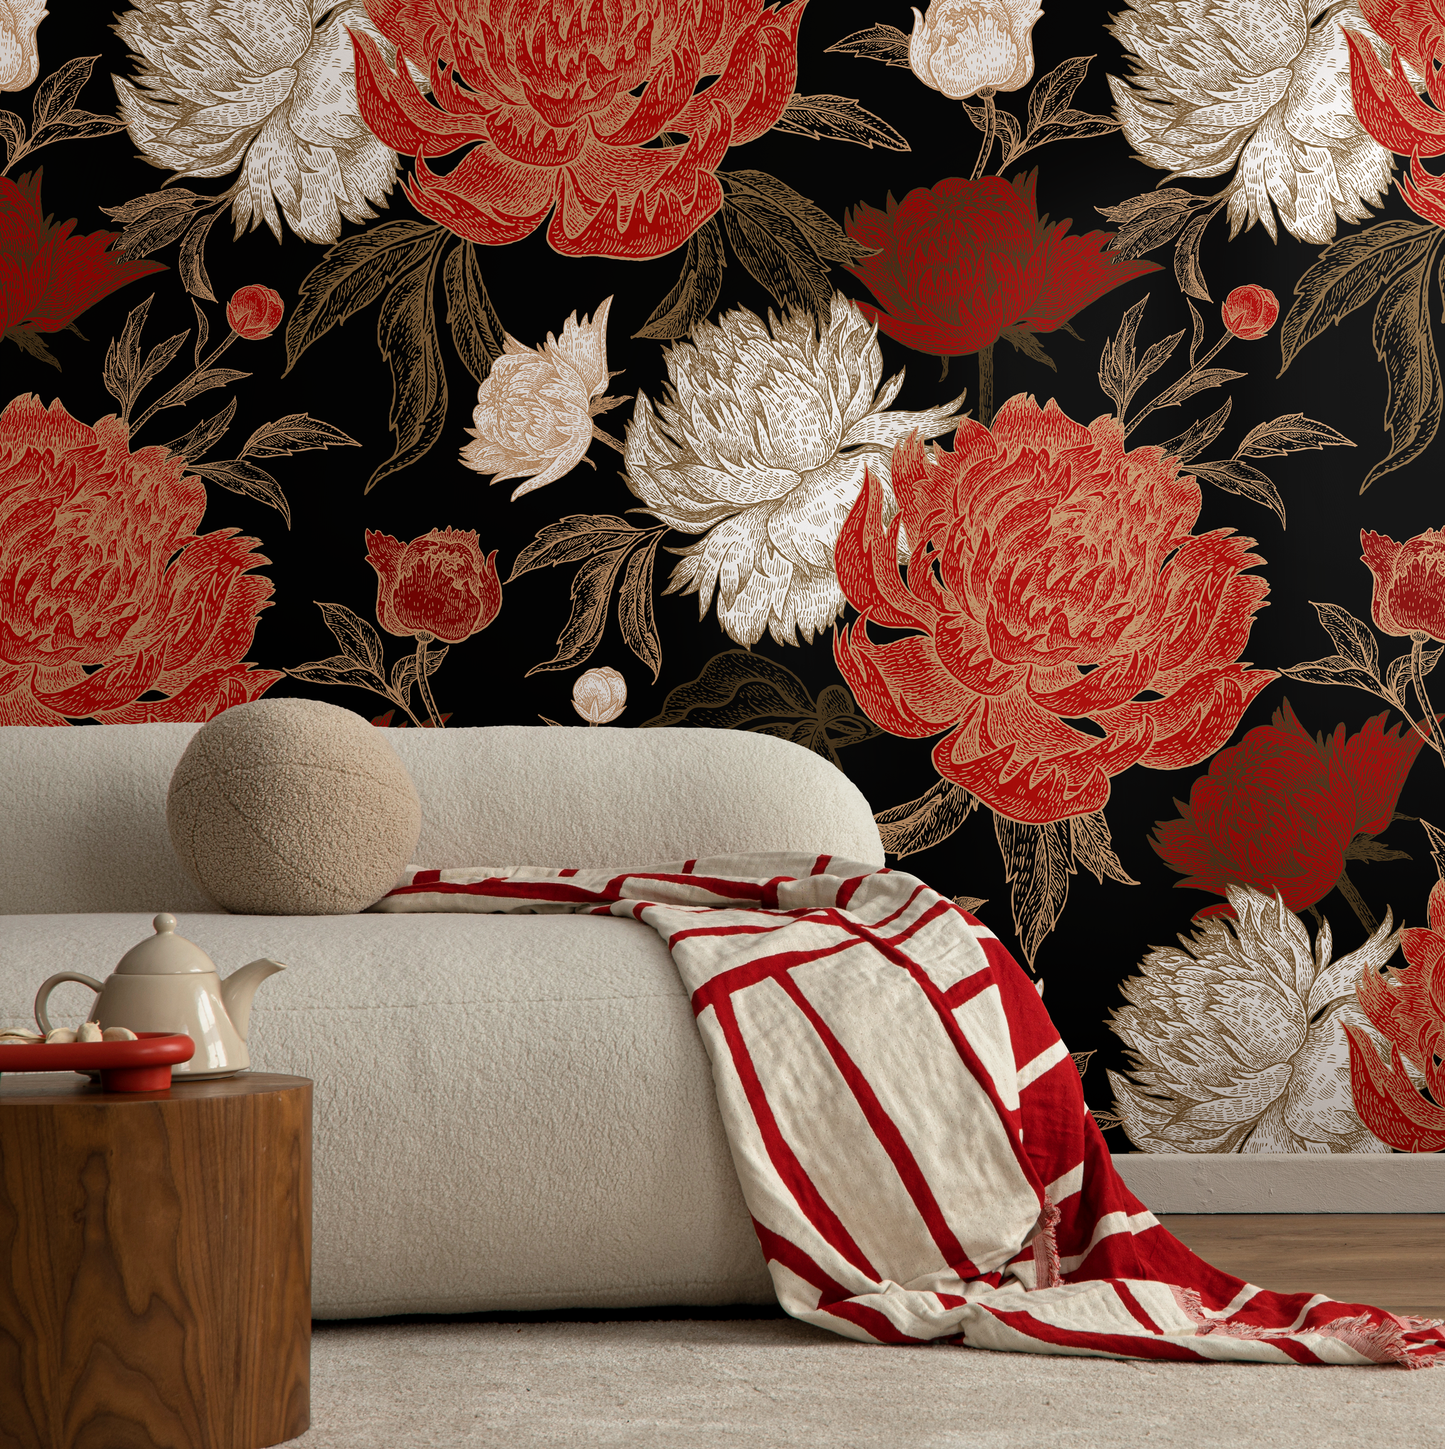 Removable Wallpaper Peel and Stick Wallpaper Wall Paper Wall Mural Temporary Wallpaper Wall Mural - A702